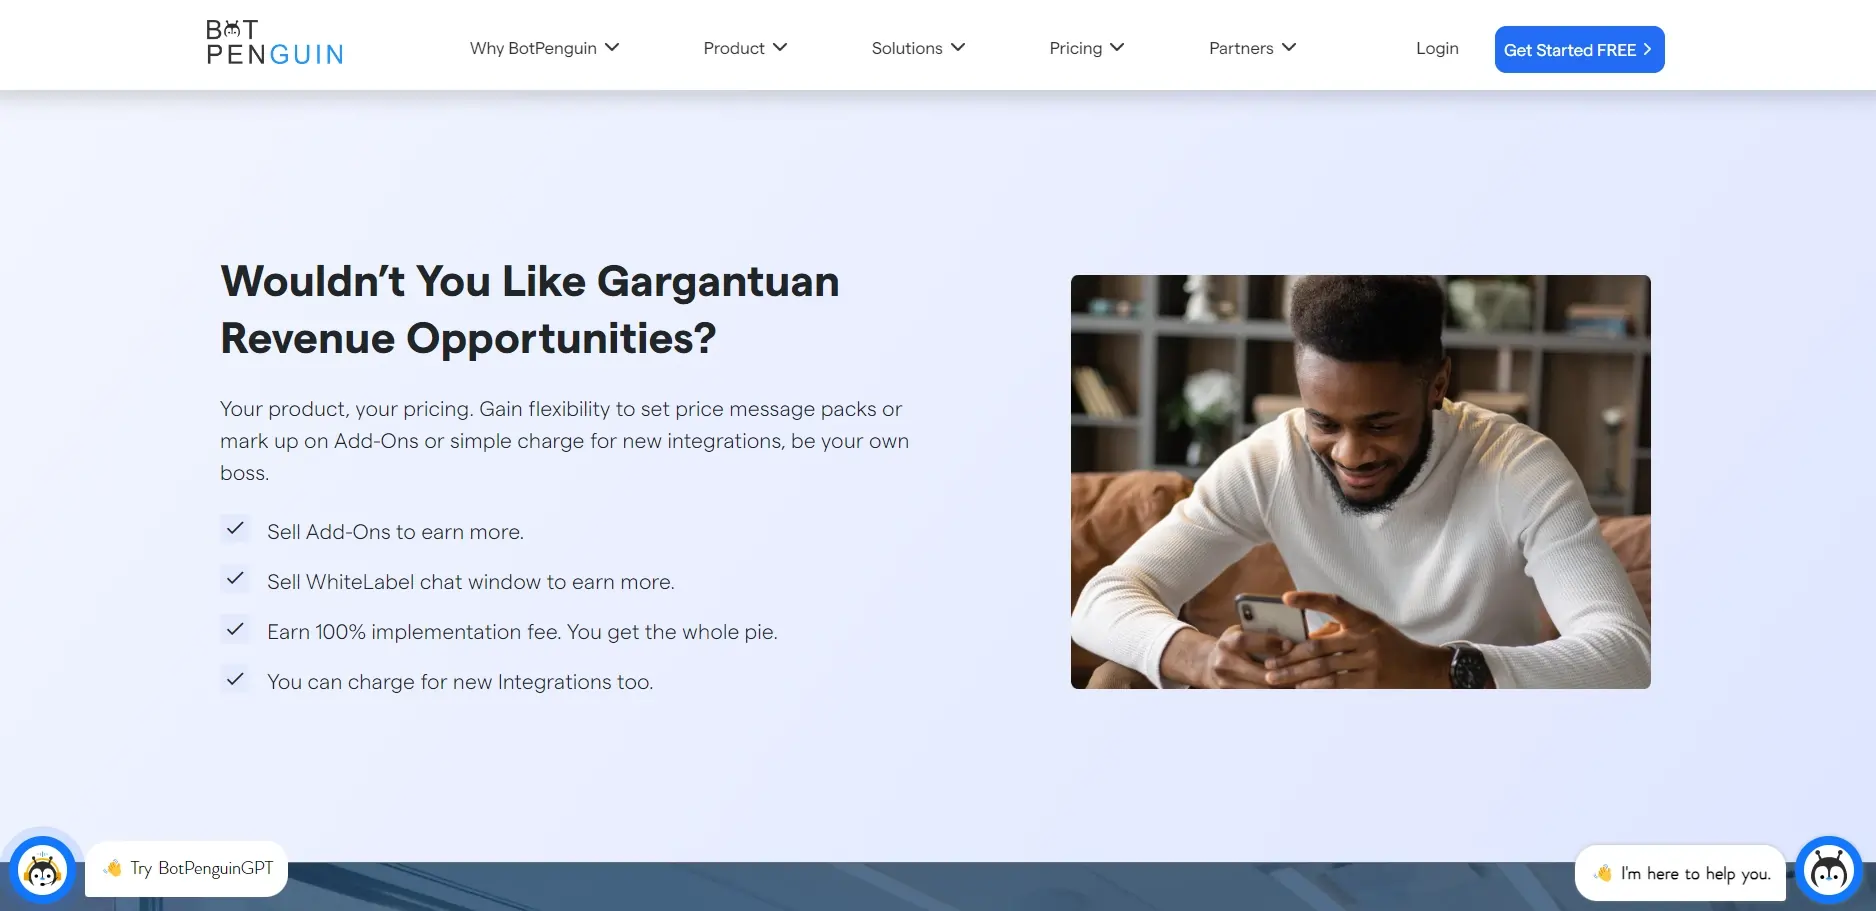 BotPenguin would enable you to make financial savings